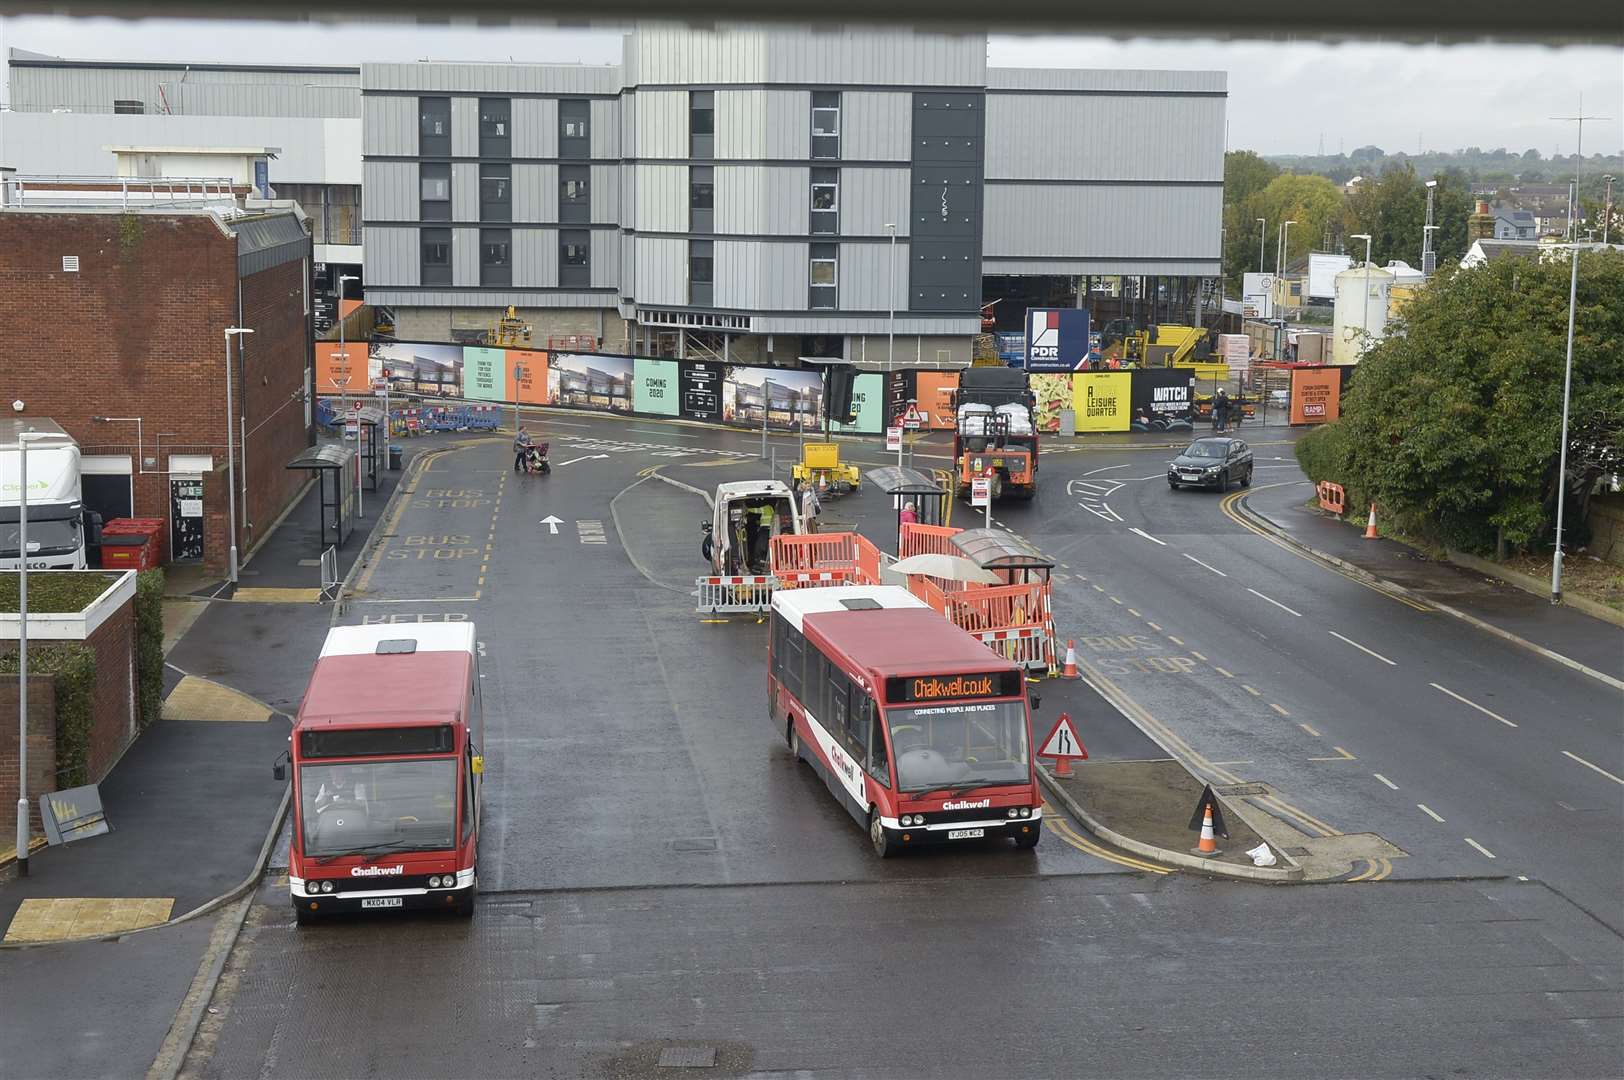 The new Sittingbourne bus hub is set to open next week